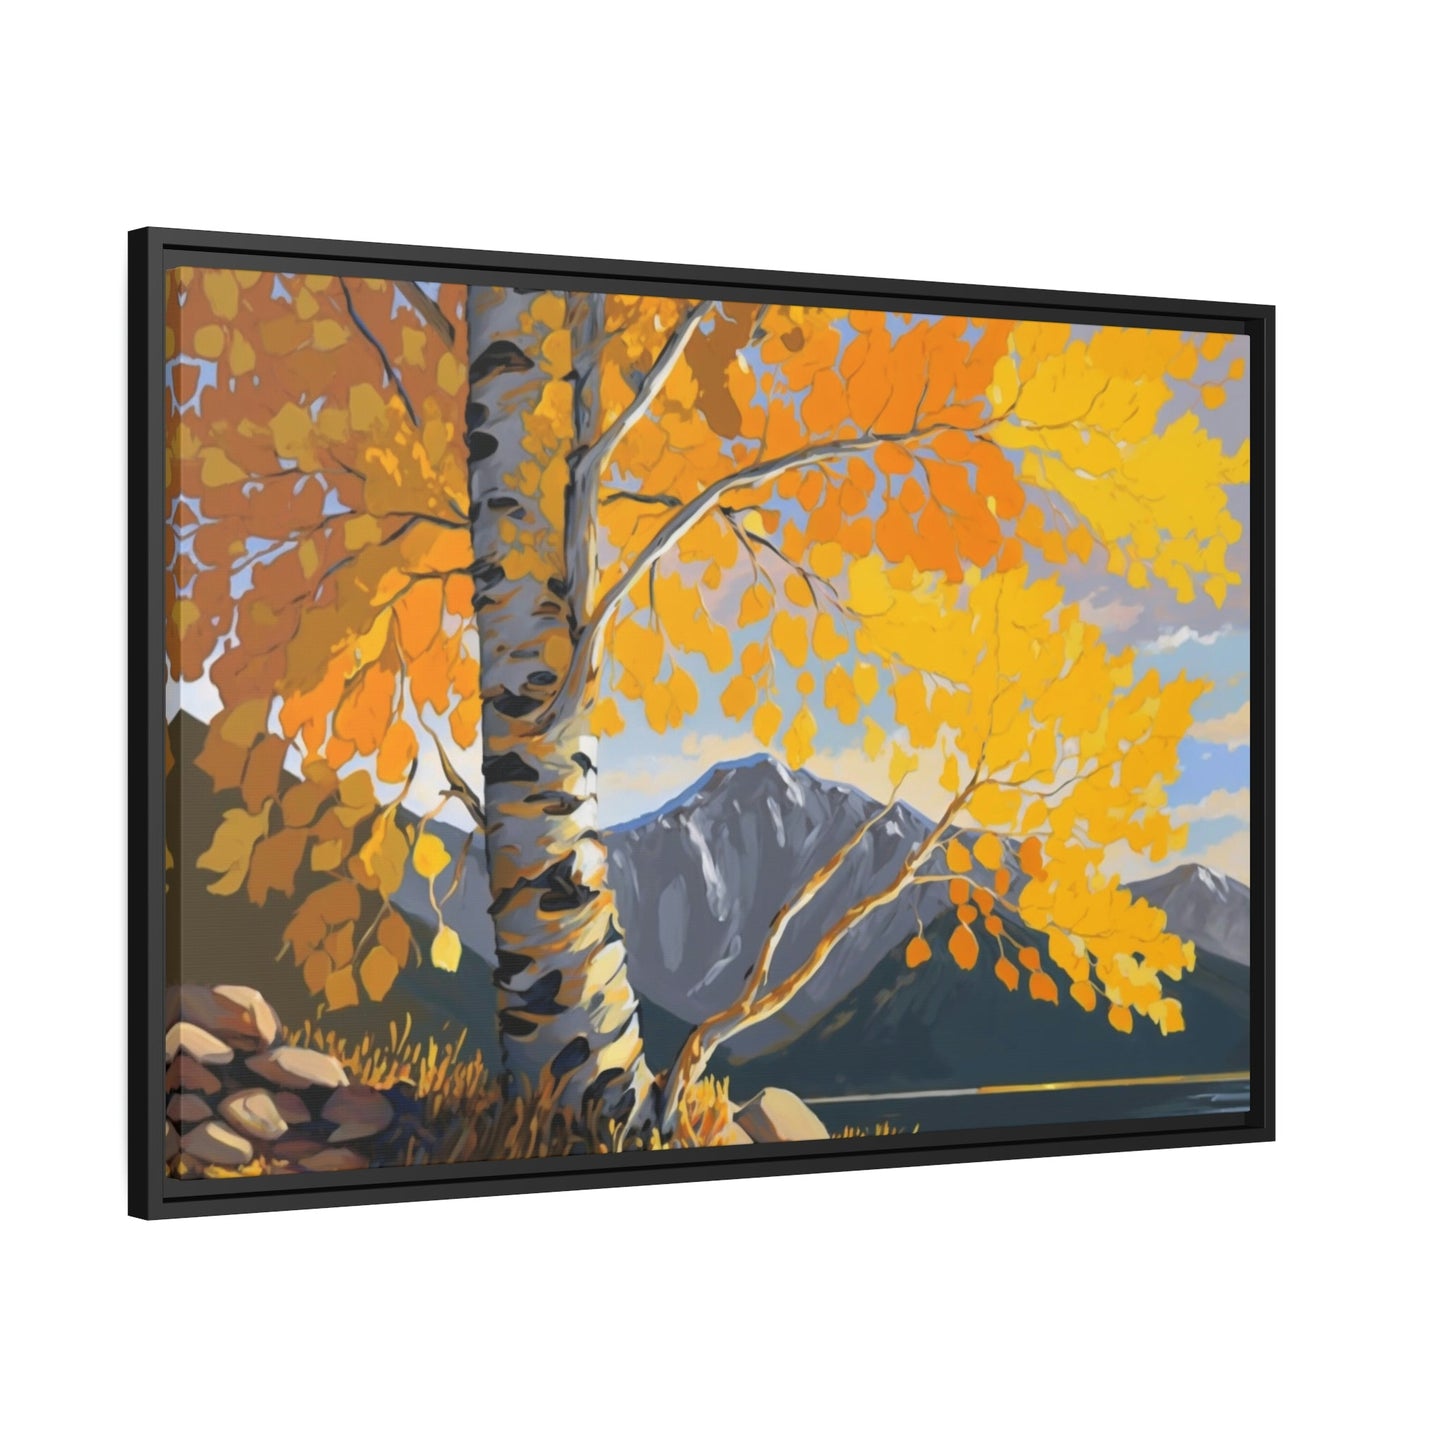 The Majesty of Aspen Trees: Framed Canvas & Poster Print of Golden Leaves